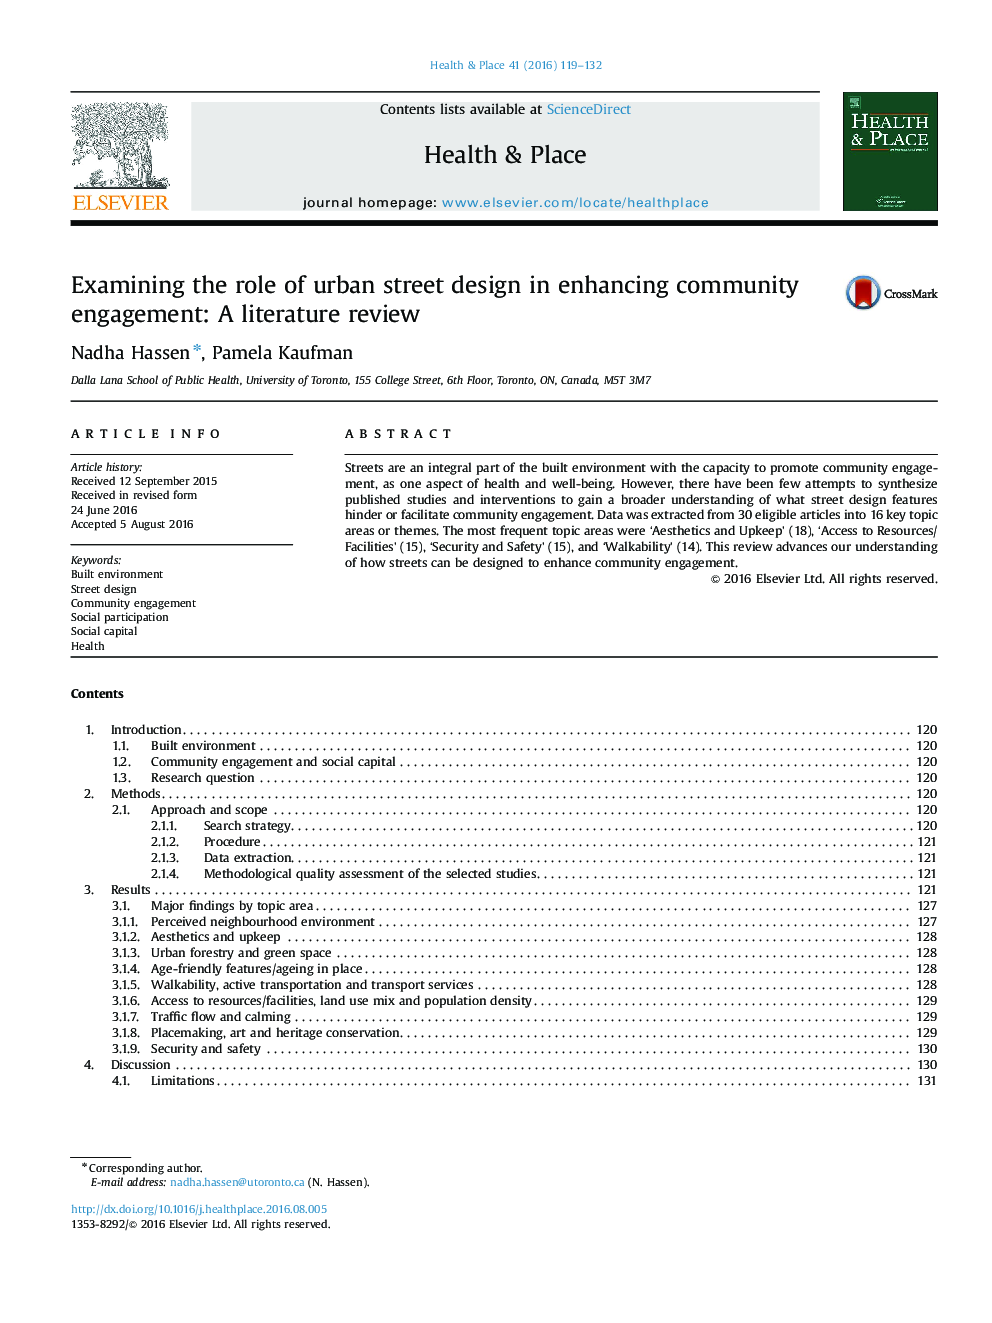 Examining the role of urban street design in enhancing community engagement: A literature review